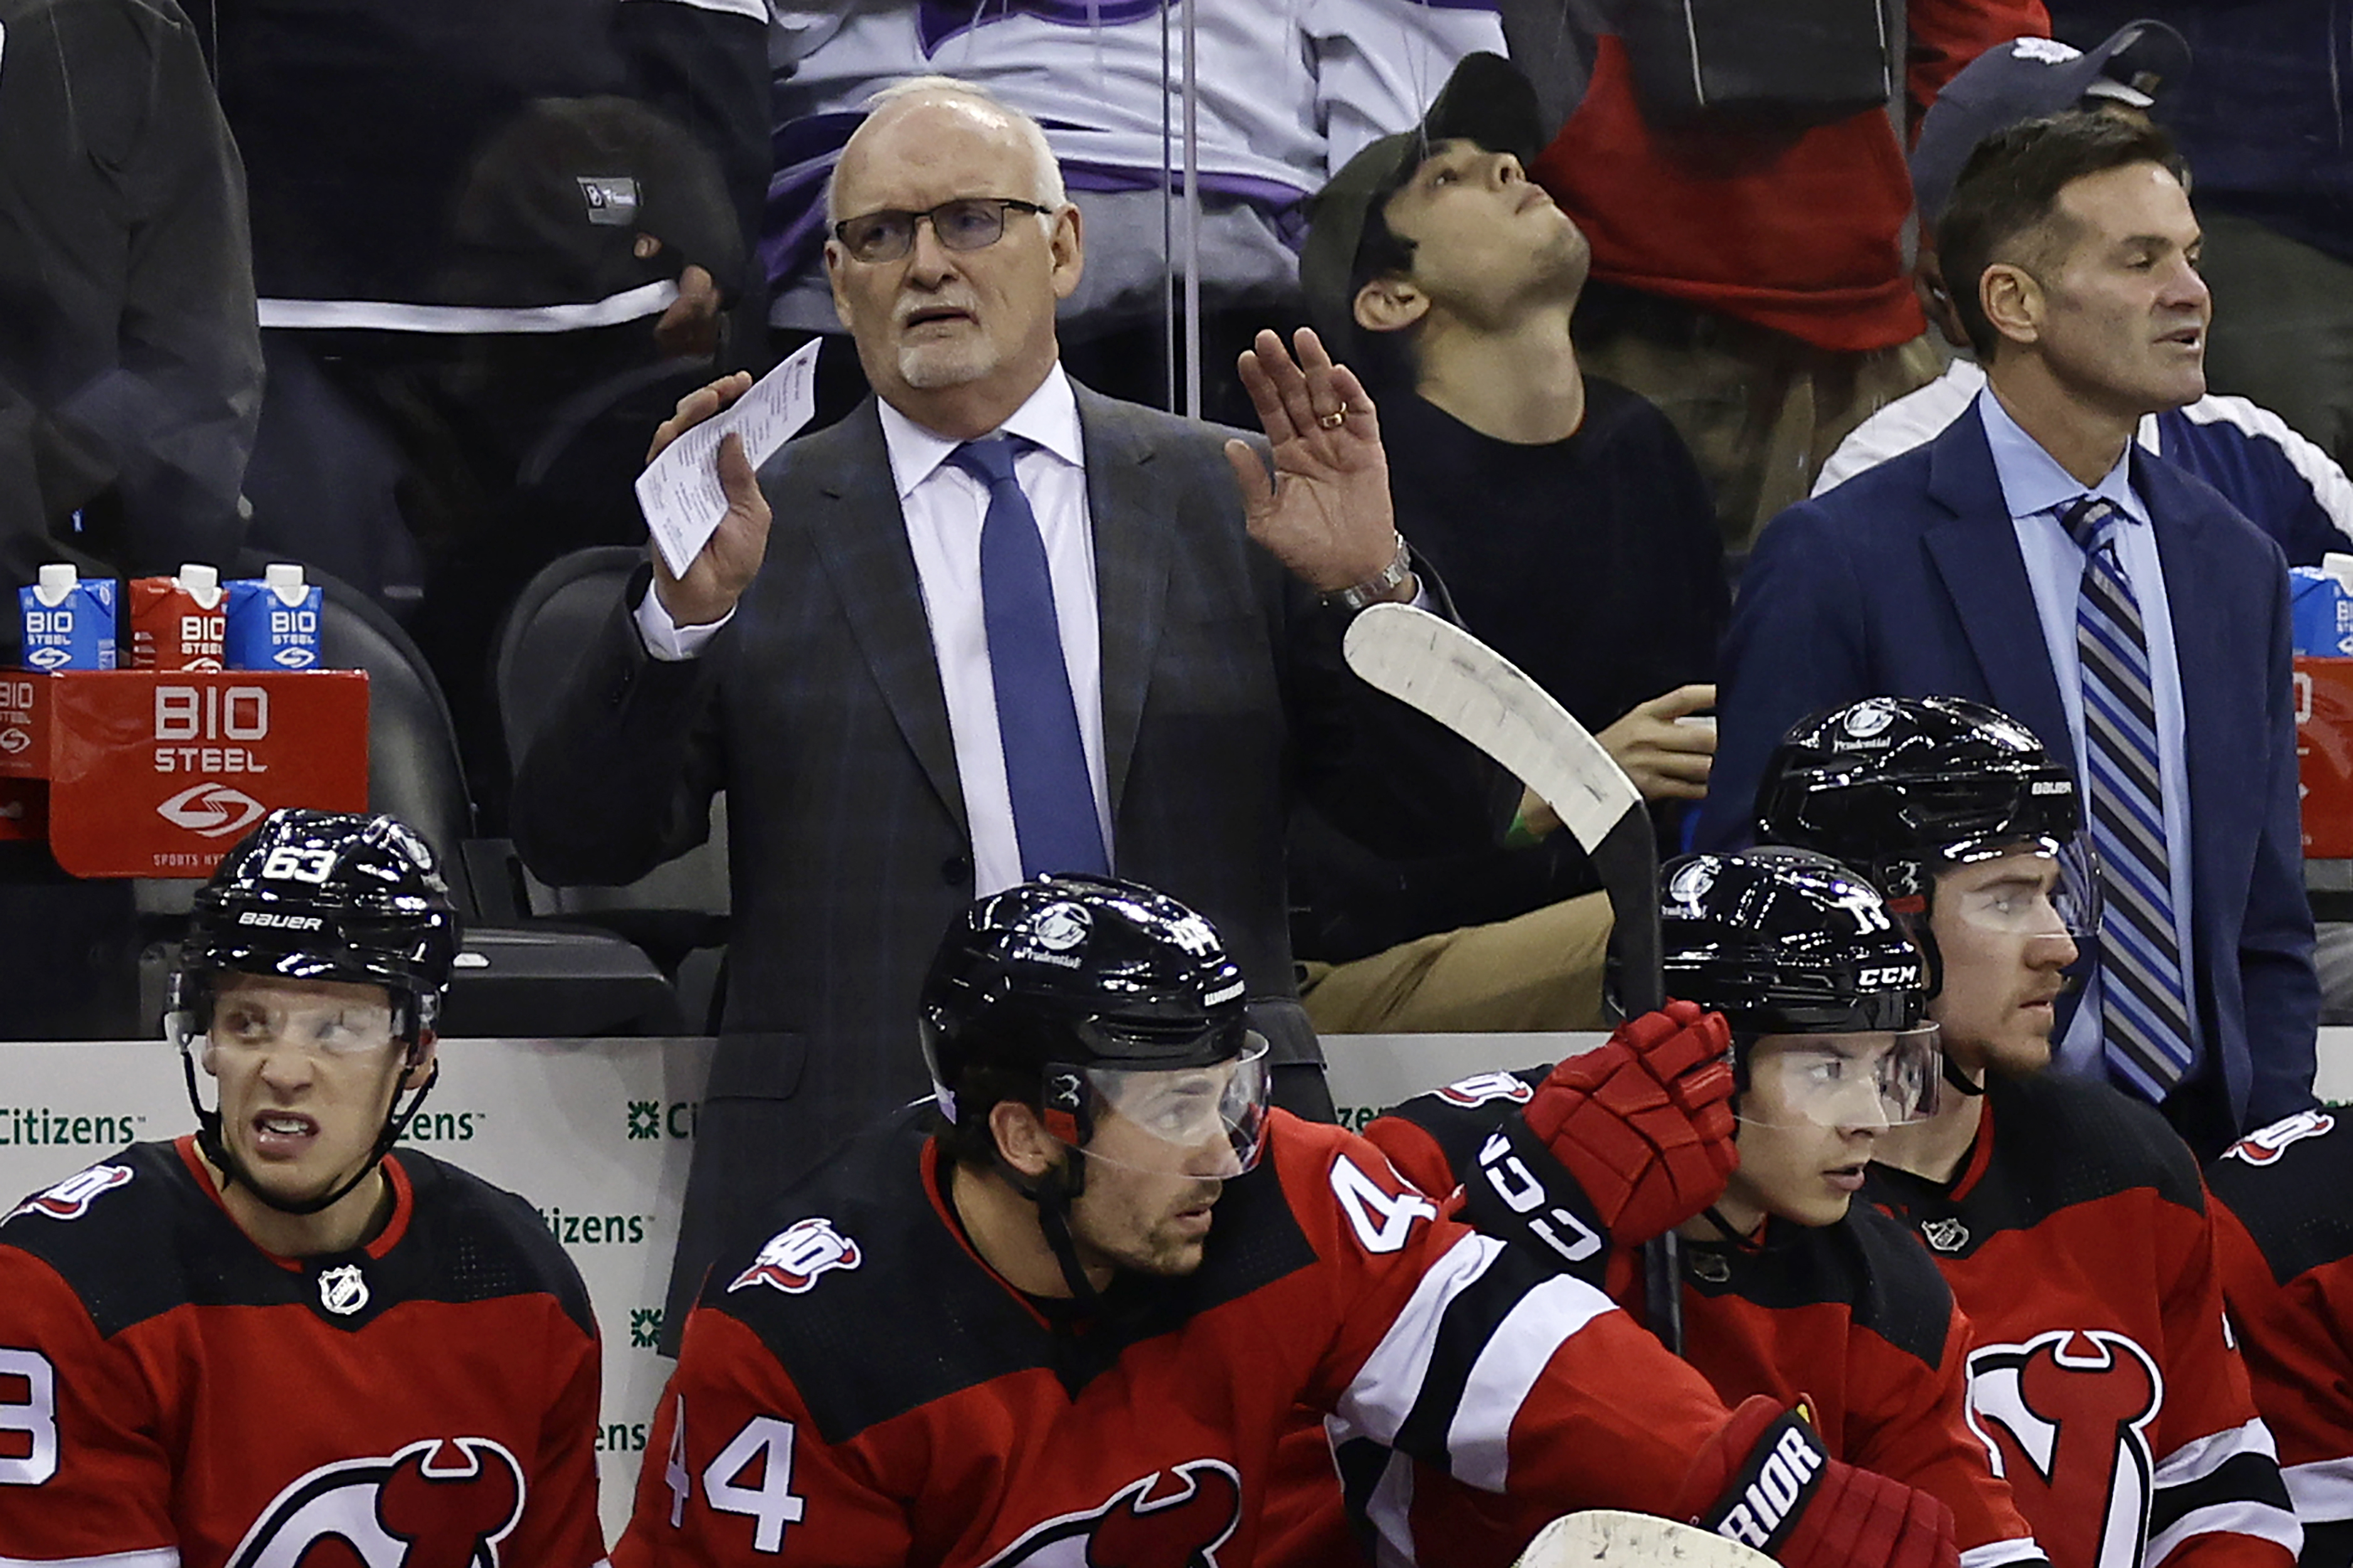 Devils' winning streak stopped at 13 in loss to Maple Leafs - The